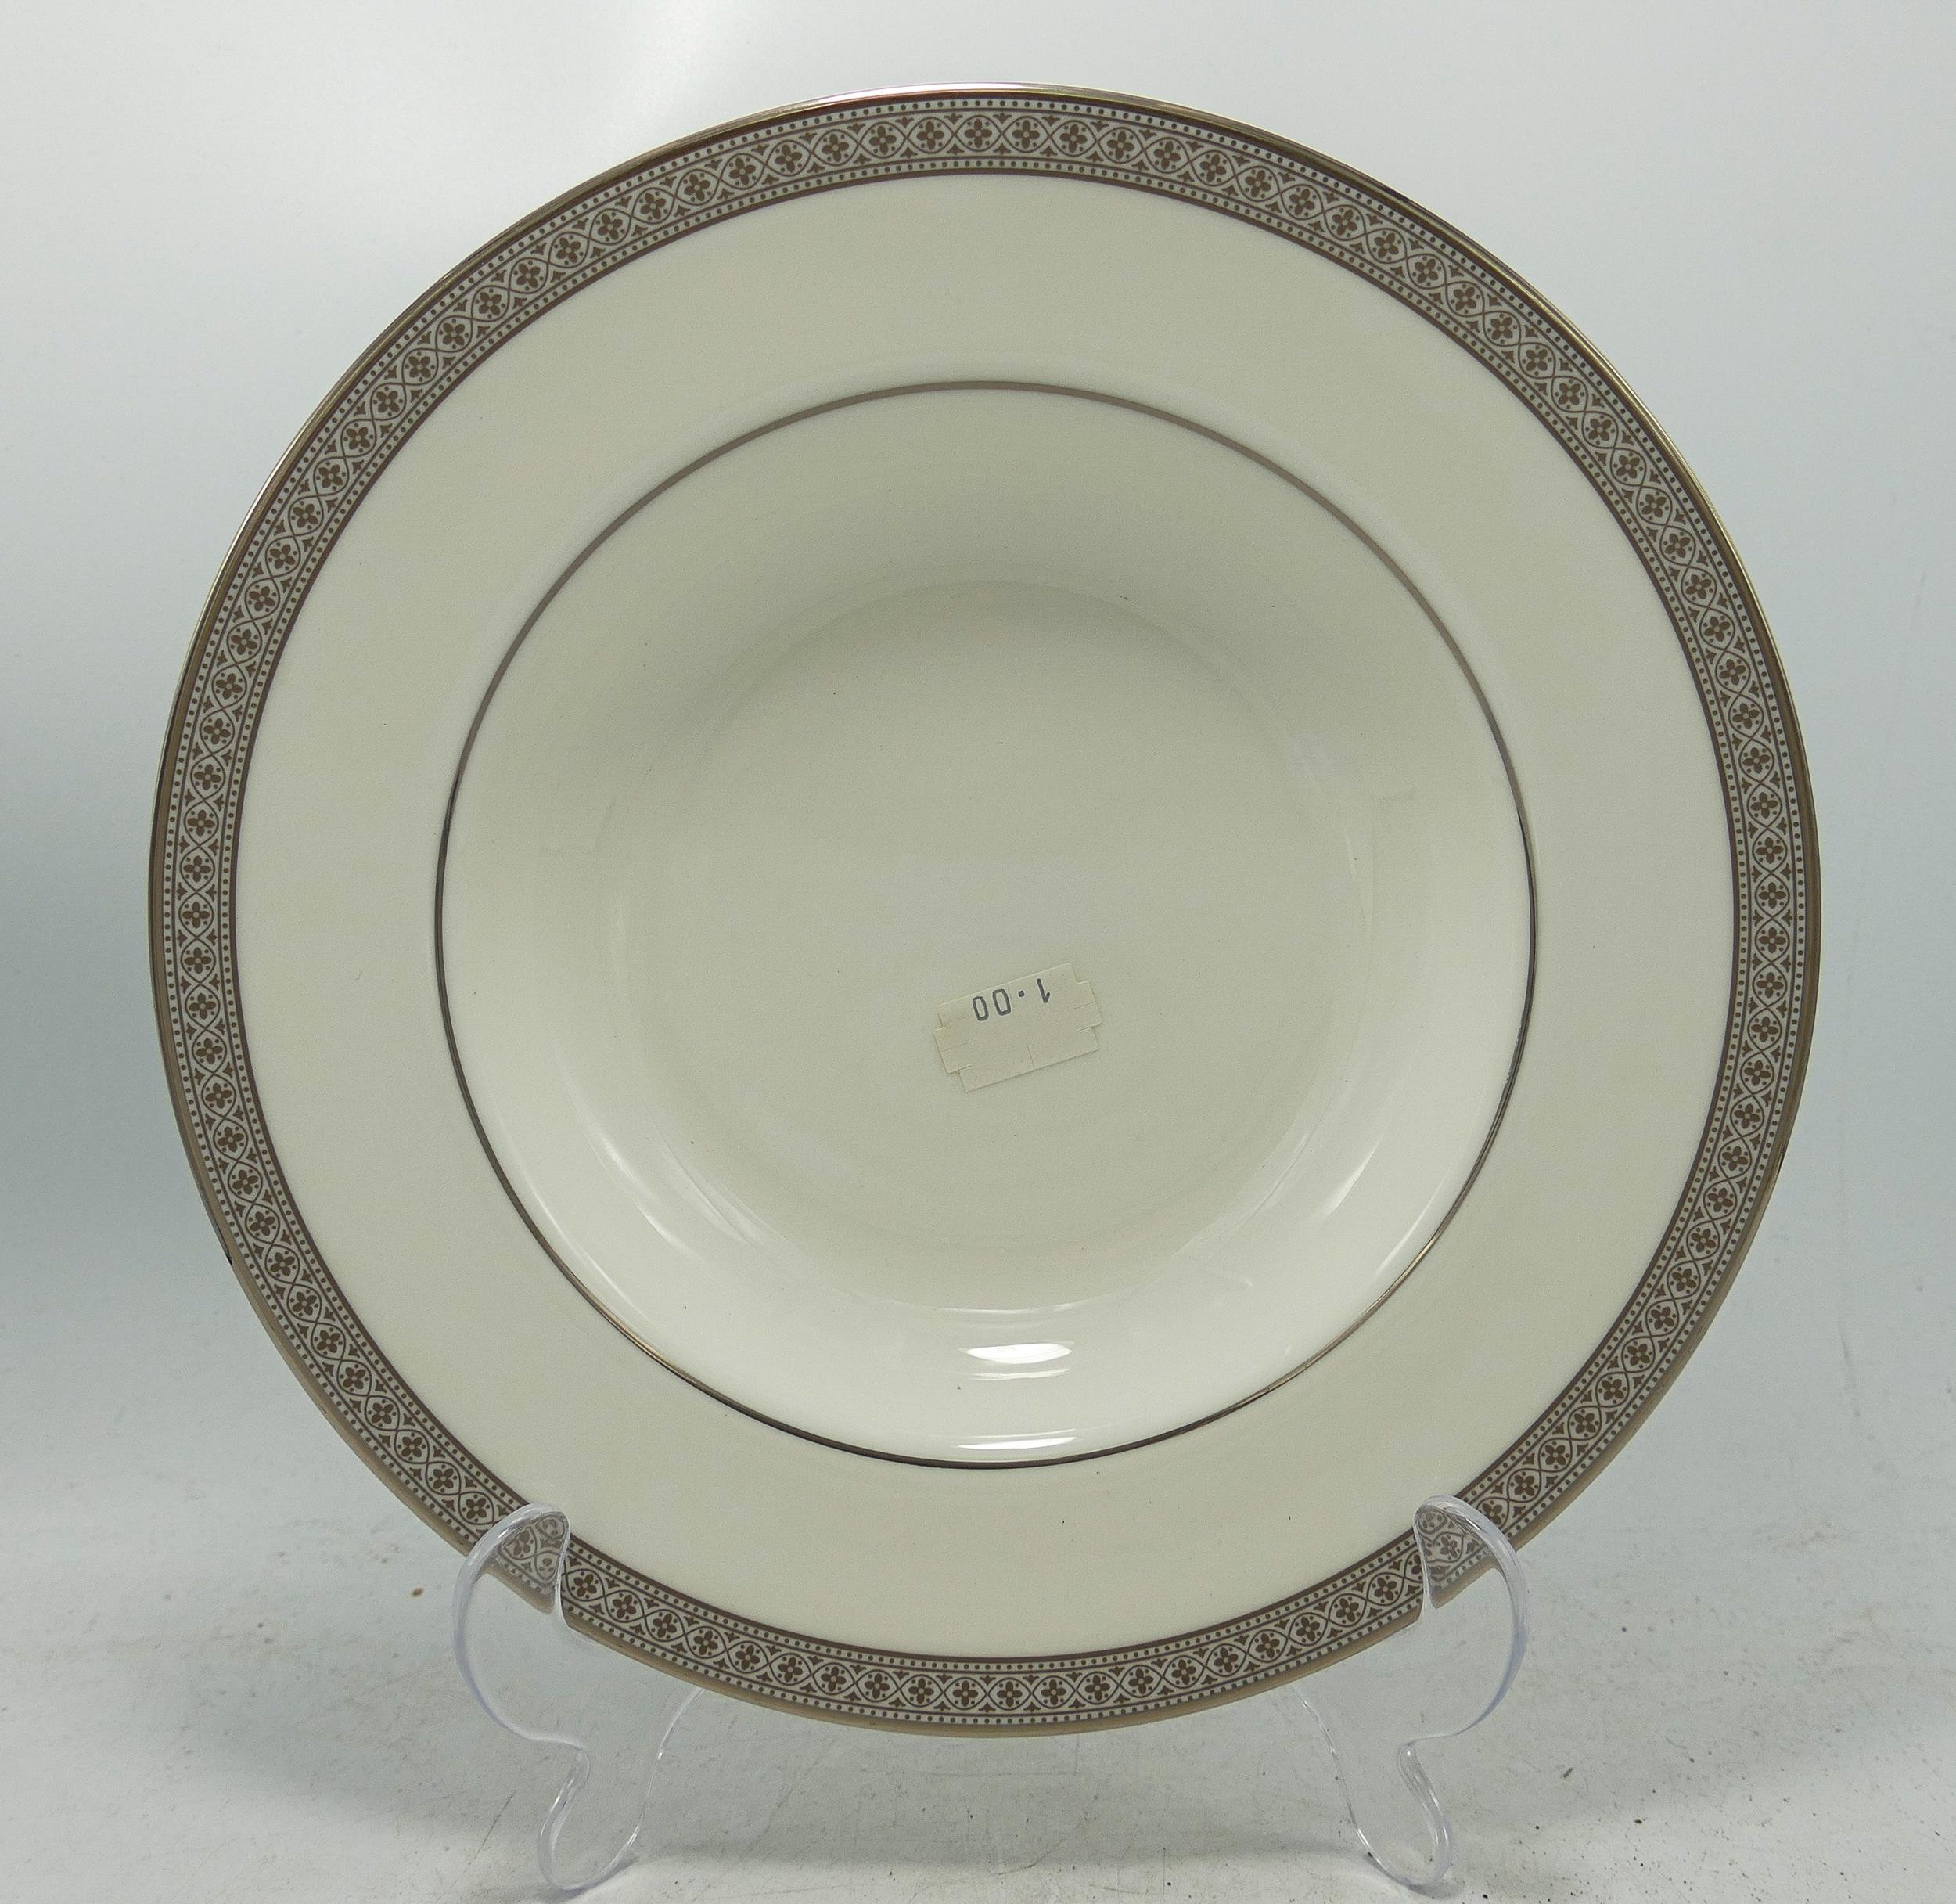 Royal Doulton Archives Piper Platinum patterned tea & dinner ware to include - cups & saucers x 46 - Image 2 of 3